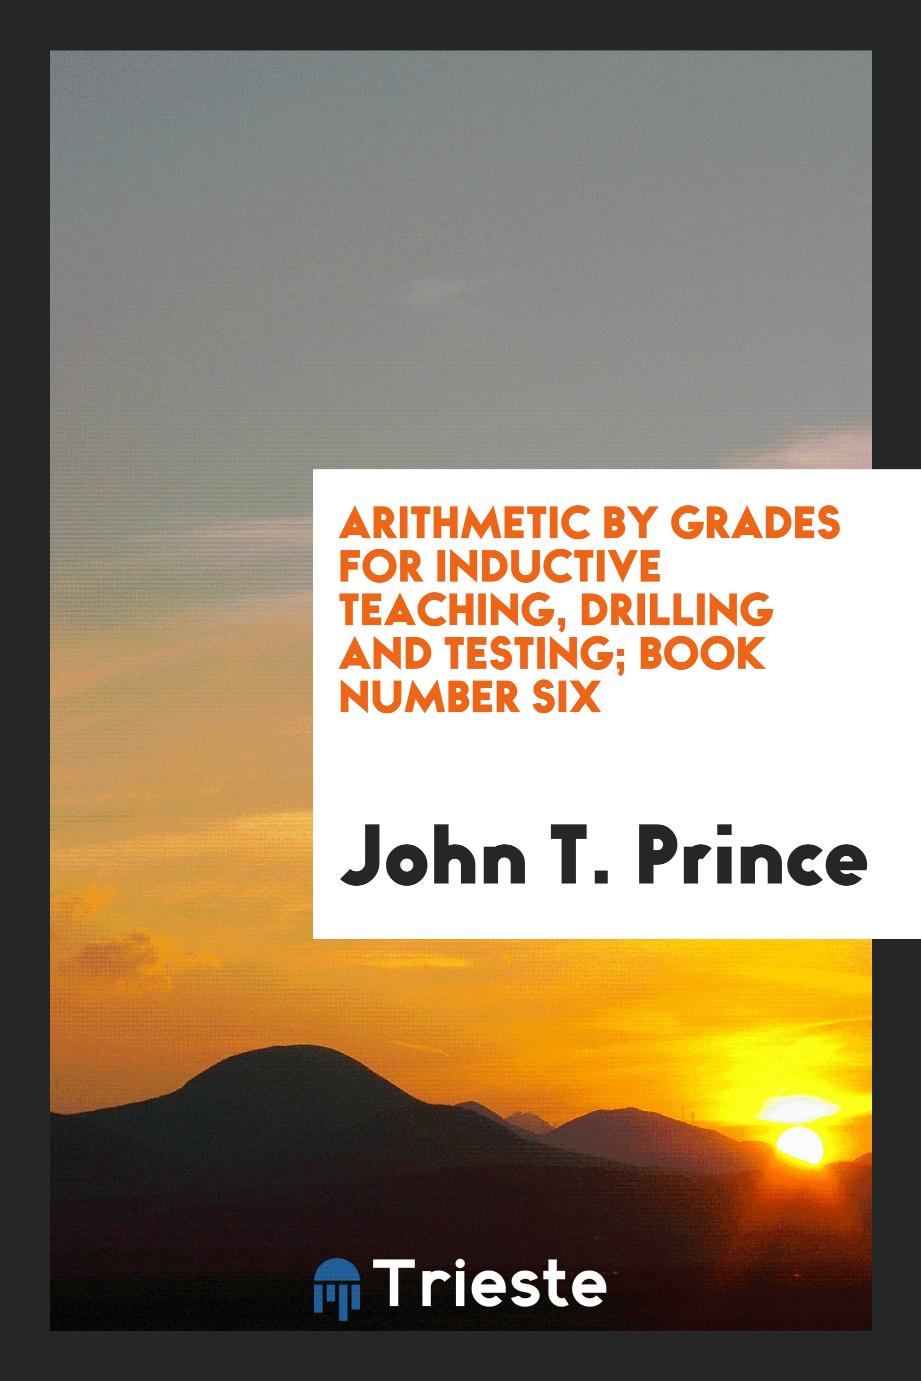 Arithmetic by Grades for Inductive Teaching, Drilling and Testing; Book Number Six